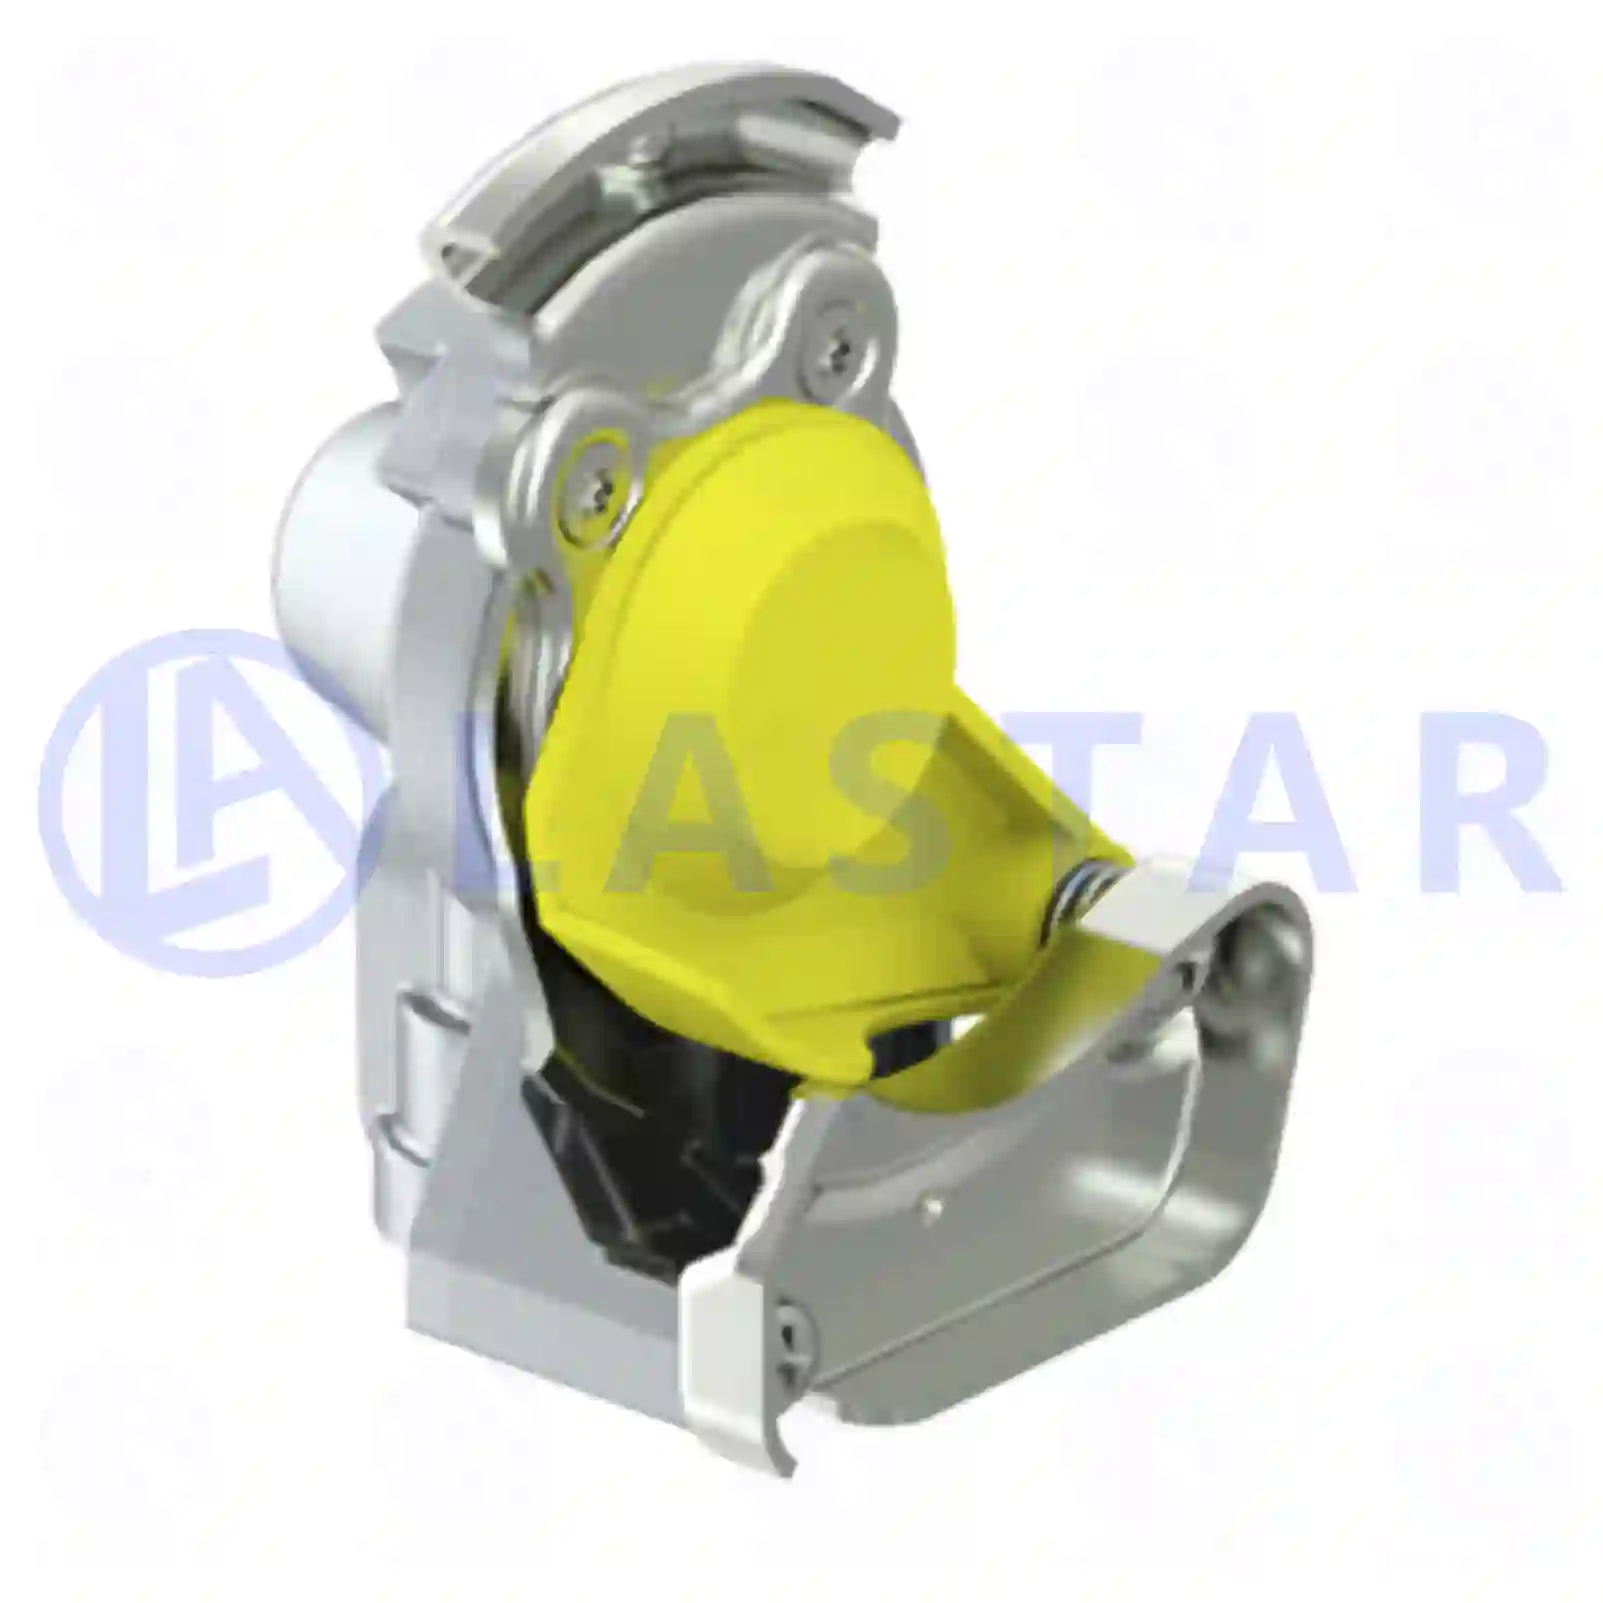 Palm coupling, automatic shutter, yellow lid, 77724598, 0632566, 1519232, 632566, AFA4271019, CF3517862, CF3519116, H03196101, 154434, 02515210, 02515442, 02516900, 02521367, 04323302, 04715224, 04715225, 04841036, 04983302, 2515210, 2515442, 2516900, 2521367, 42070650, 4323302, 4715225, 4841036, 4983302, 5000607008, 5010260538, 76625, 500945411, 5009454110, 505806558, 945411, 502915601, 09522002220, 32512206004, 32512206005, 32512206006, 32512206007, 81512206027, 81512206032, 81512206046, 81512206069, 81512206079, 81512206093, 81512206096, 81512206098, 81512206103, 81512206109, 81512206112, 82512206027, 85500013215, 0004294030, 0004295030, 0004296230, 0004298130, 0004298730, 0004299830, 0004295630, 4522002220, 112233200, 462006, 462011, AFA427119, 5000438153, 5000442714, 5000607008, 5000877206, 5021170413, 5430000850, 7700051792, 318159, 051403, 8285281000, 8285385000, 82853920000, 1567994, 1584599, 20467885, 3198440, 6888511, 8157984, 2V5611337G, ZG50551-0008 ||  77724598 Lastar Spare Part | Truck Spare Parts, Auotomotive Spare Parts Palm coupling, automatic shutter, yellow lid, 77724598, 0632566, 1519232, 632566, AFA4271019, CF3517862, CF3519116, H03196101, 154434, 02515210, 02515442, 02516900, 02521367, 04323302, 04715224, 04715225, 04841036, 04983302, 2515210, 2515442, 2516900, 2521367, 42070650, 4323302, 4715225, 4841036, 4983302, 5000607008, 5010260538, 76625, 500945411, 5009454110, 505806558, 945411, 502915601, 09522002220, 32512206004, 32512206005, 32512206006, 32512206007, 81512206027, 81512206032, 81512206046, 81512206069, 81512206079, 81512206093, 81512206096, 81512206098, 81512206103, 81512206109, 81512206112, 82512206027, 85500013215, 0004294030, 0004295030, 0004296230, 0004298130, 0004298730, 0004299830, 0004295630, 4522002220, 112233200, 462006, 462011, AFA427119, 5000438153, 5000442714, 5000607008, 5000877206, 5021170413, 5430000850, 7700051792, 318159, 051403, 8285281000, 8285385000, 82853920000, 1567994, 1584599, 20467885, 3198440, 6888511, 8157984, 2V5611337G, ZG50551-0008 ||  77724598 Lastar Spare Part | Truck Spare Parts, Auotomotive Spare Parts